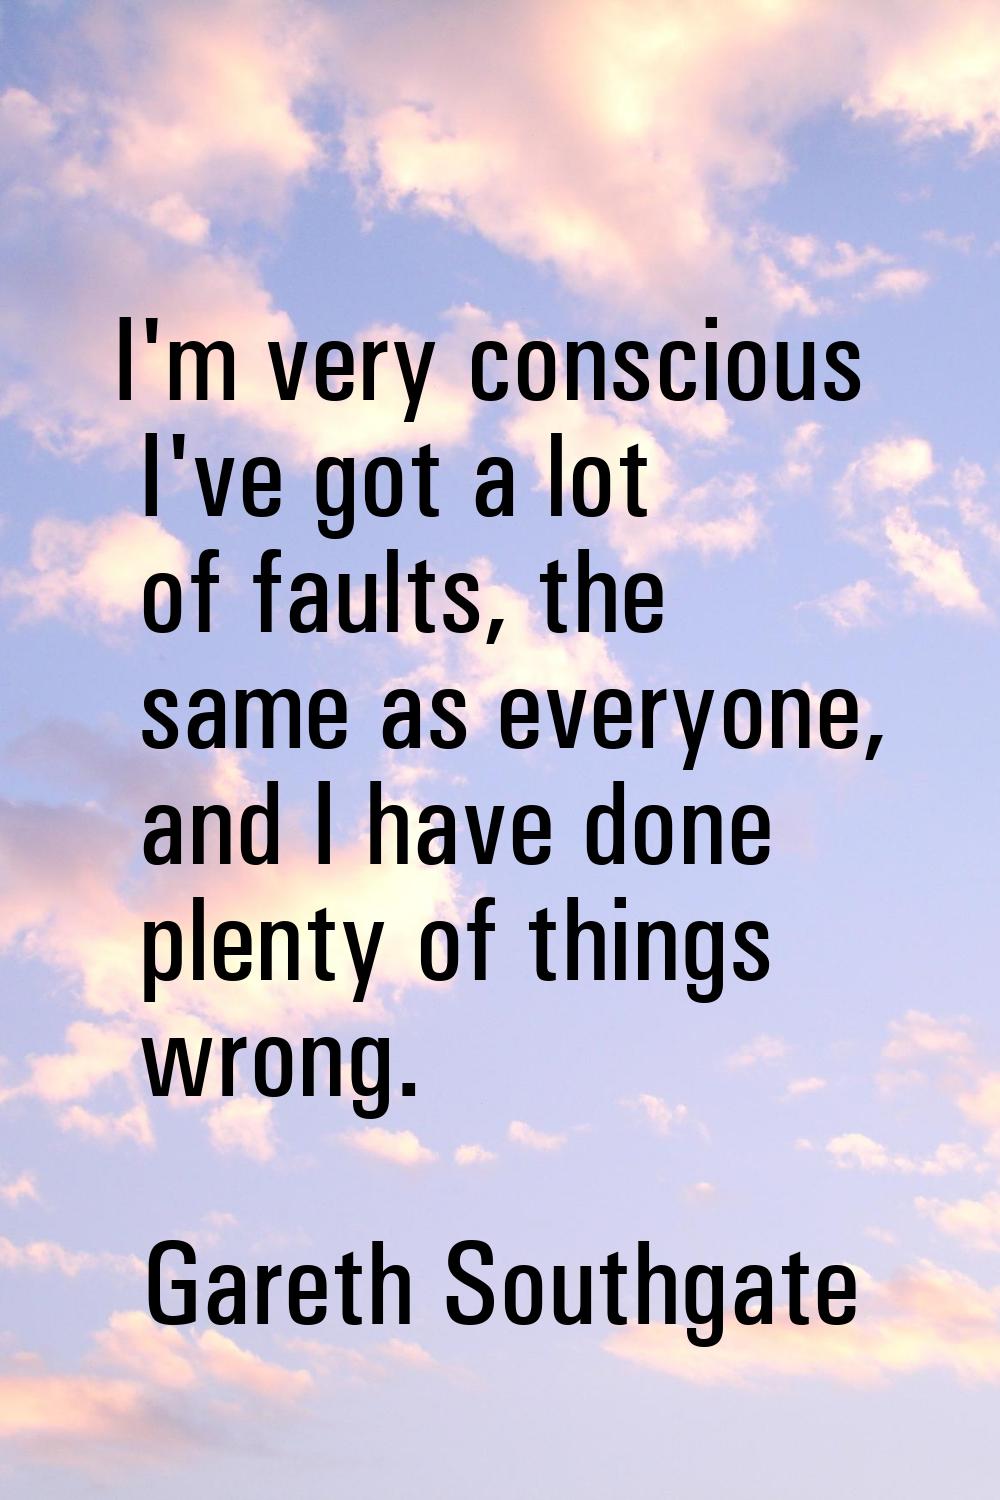 I'm very conscious I've got a lot of faults, the same as everyone, and I have done plenty of things